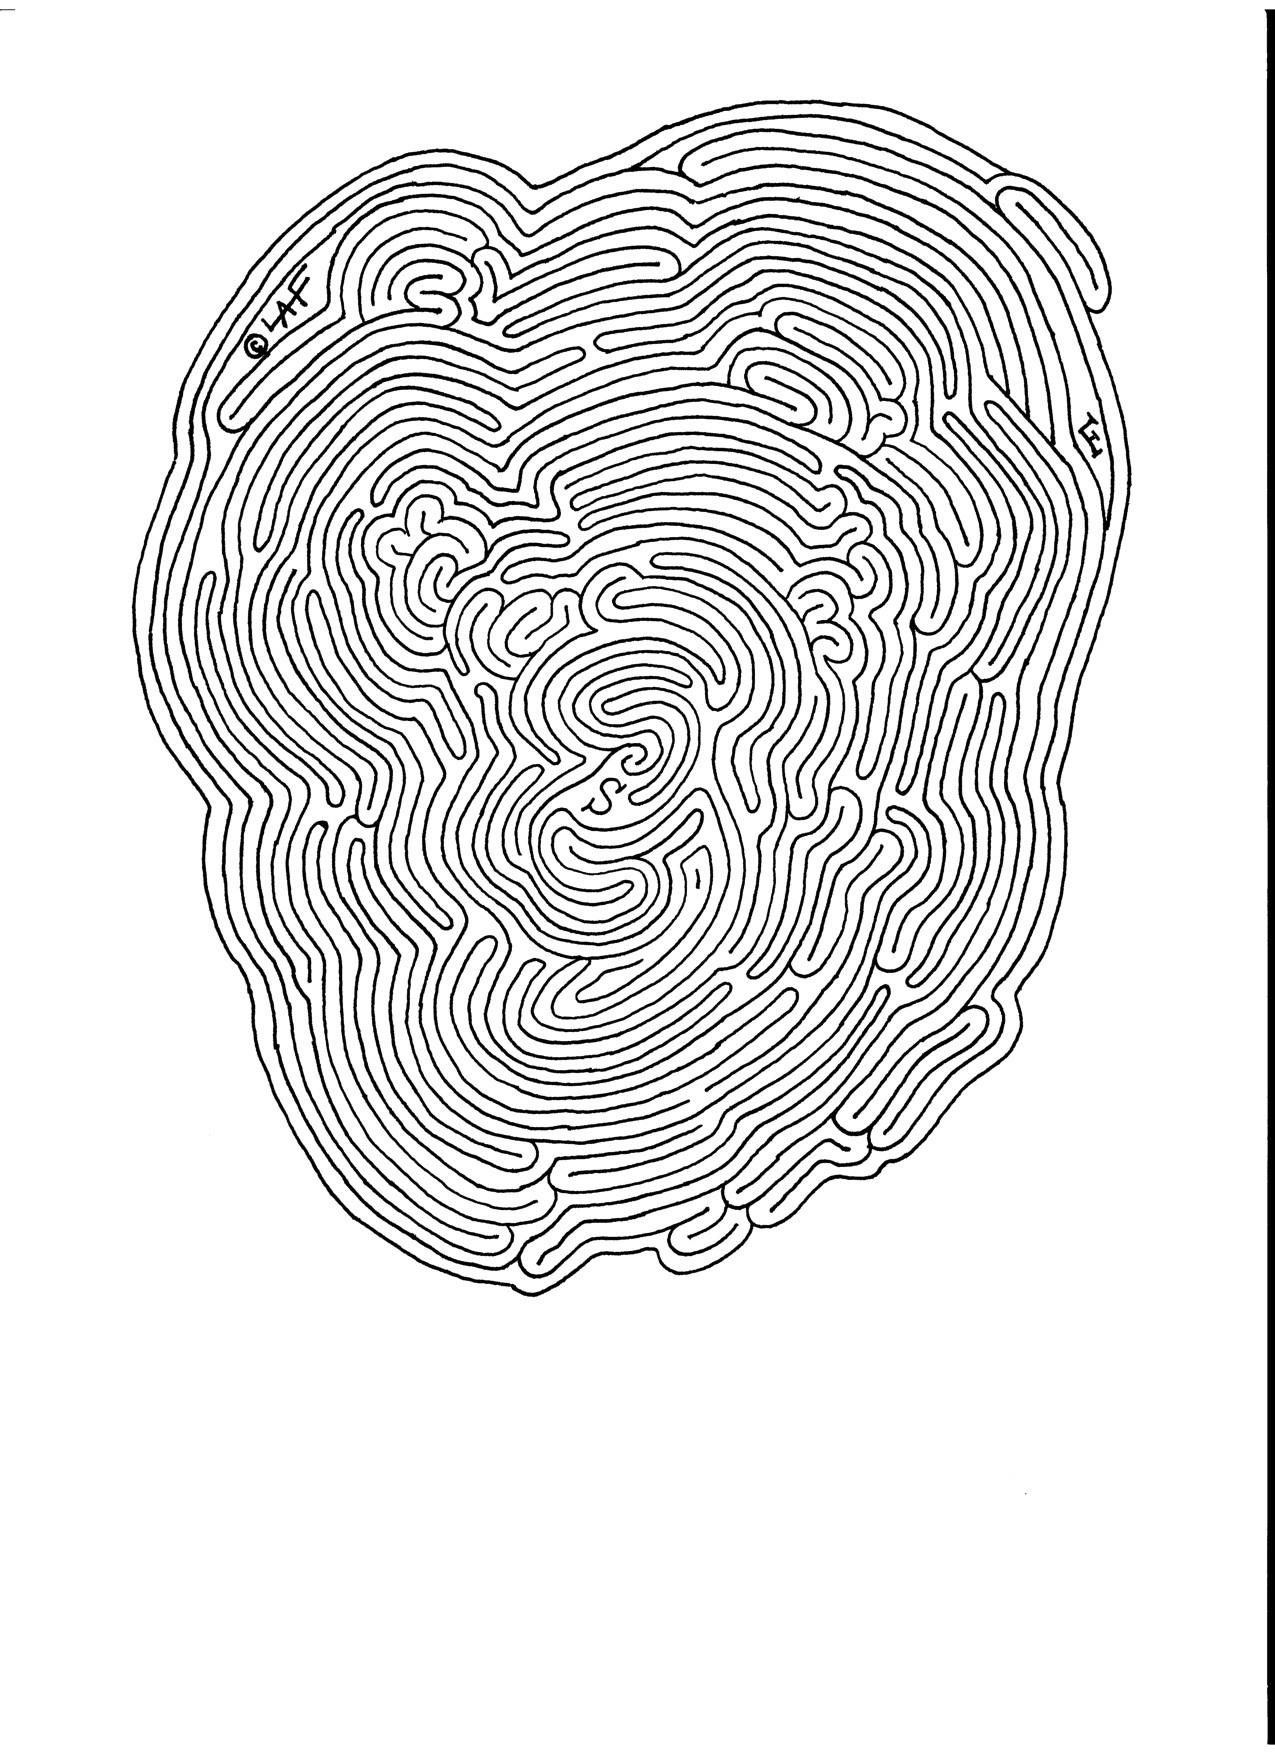 4-best-images-of-complex-mazes-printable-free-printable-mazes-hard-hard-halloween-mazes